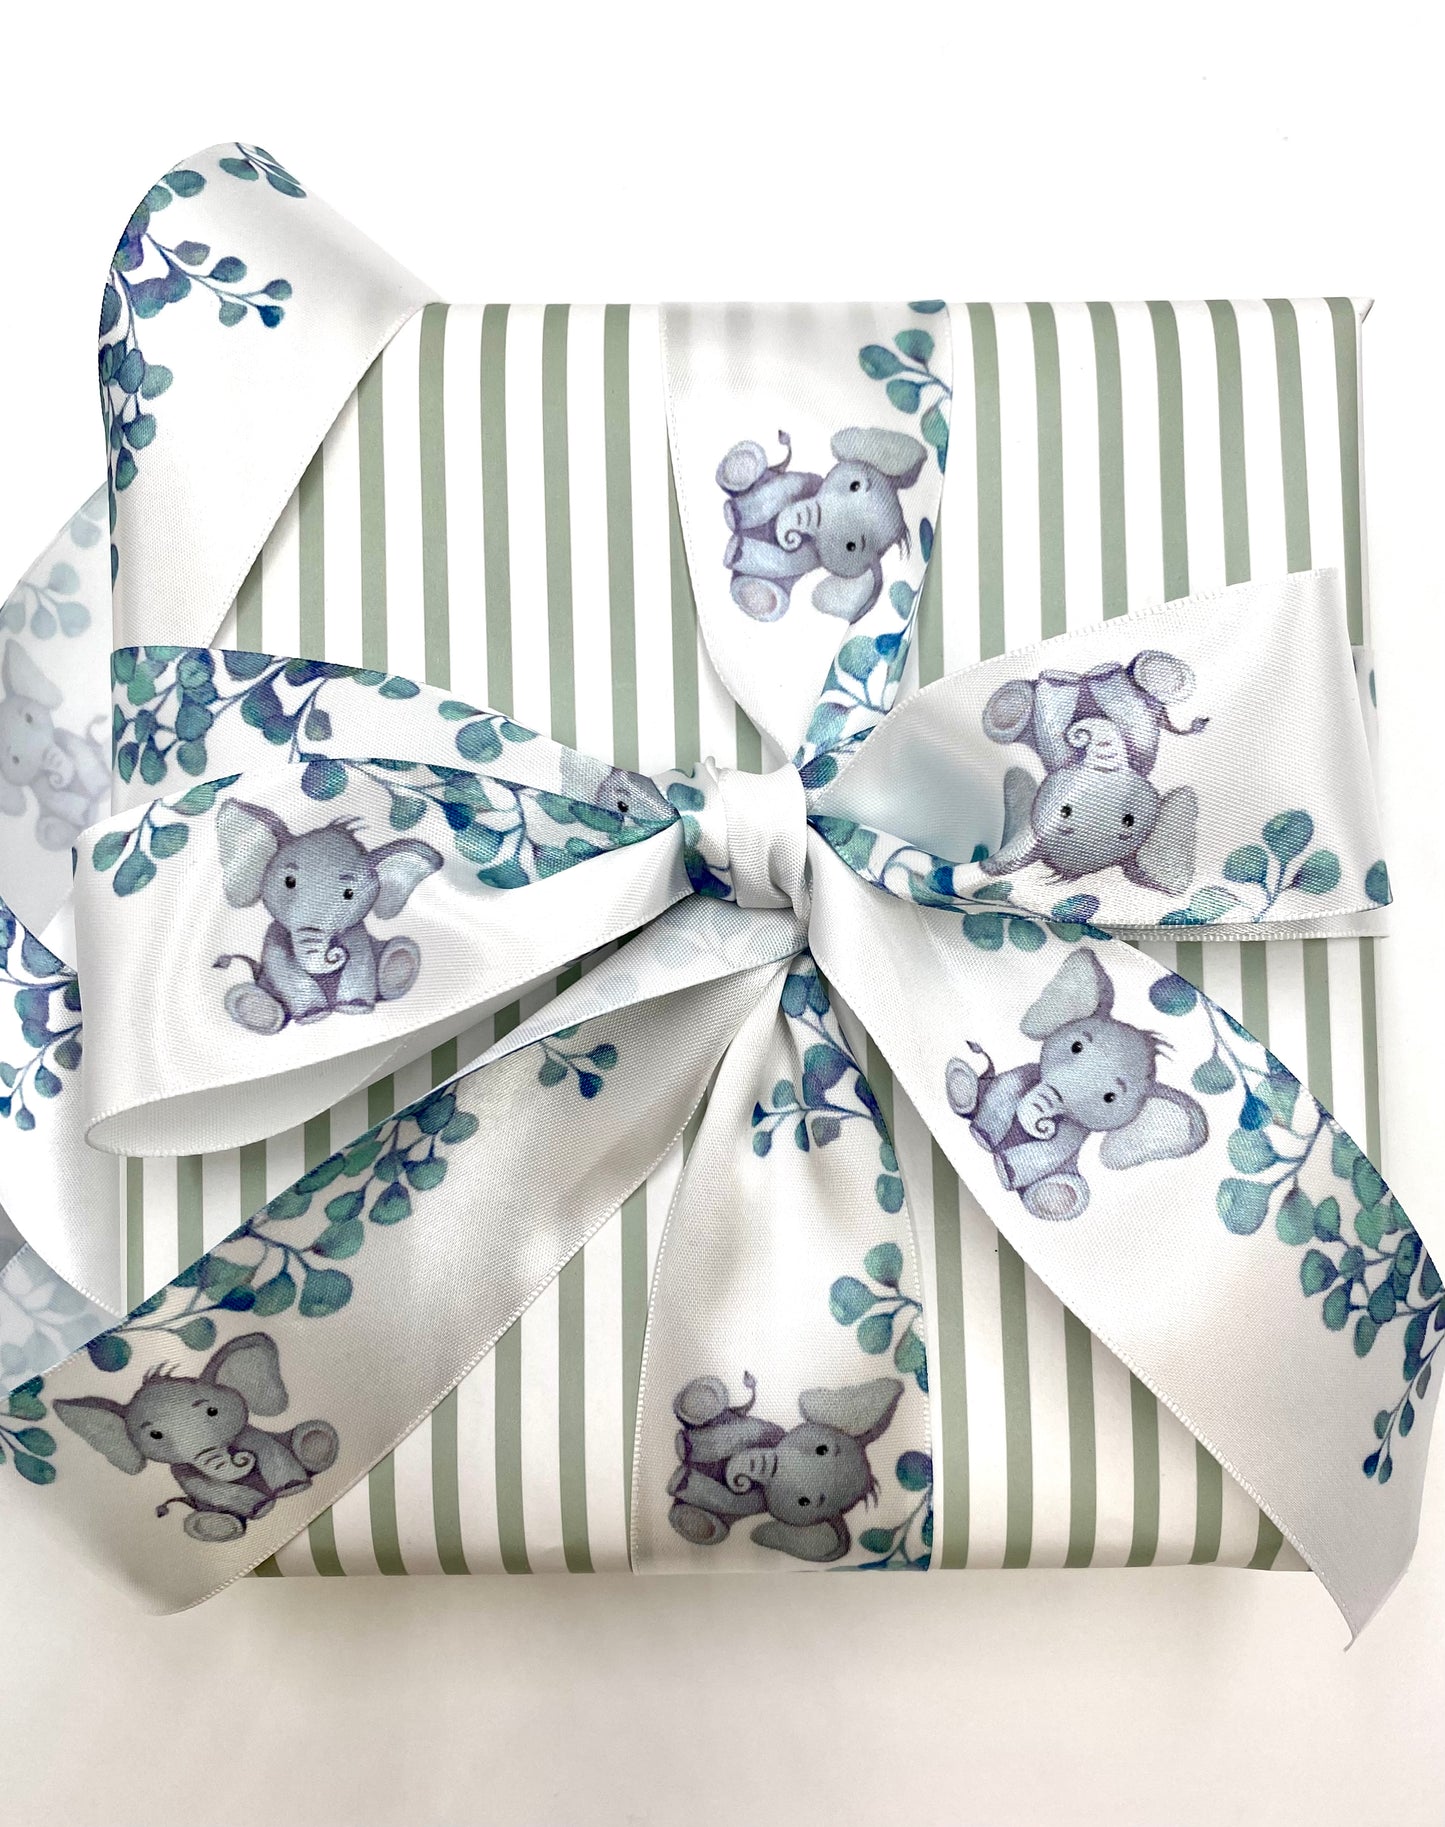 Baby Elephant ribbon with eucalyptus leaves printed on  5/8" and 1.5" white satin